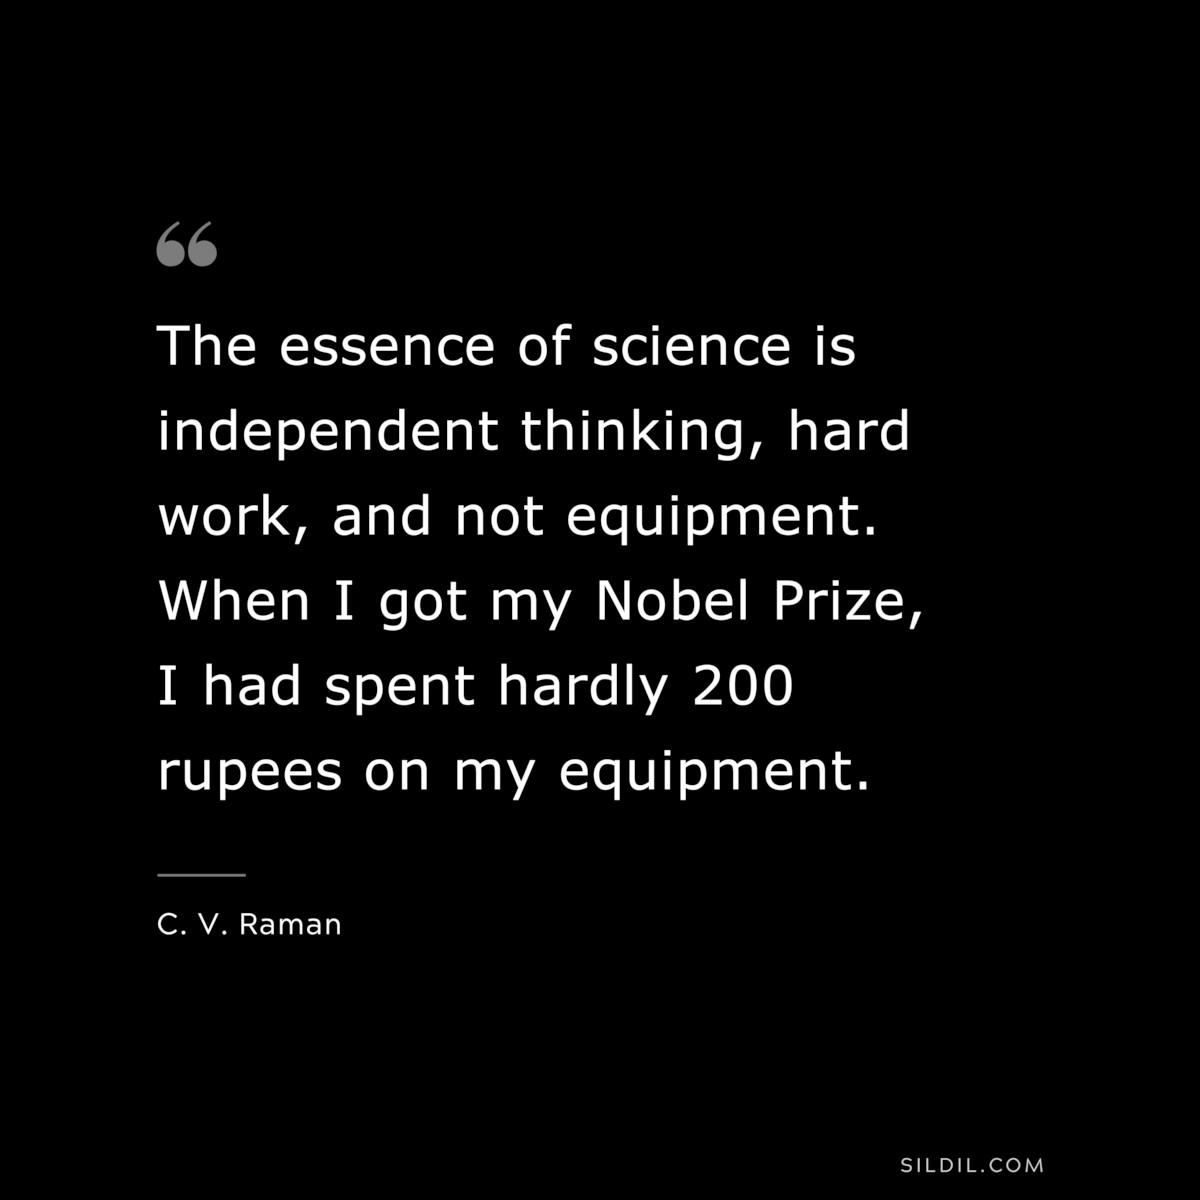 The essence of science is independent thinking, hard work, and not equipment. When I got my Nobel Prize, I had spent hardly 200 rupees on my equipment. ― C. V. Raman